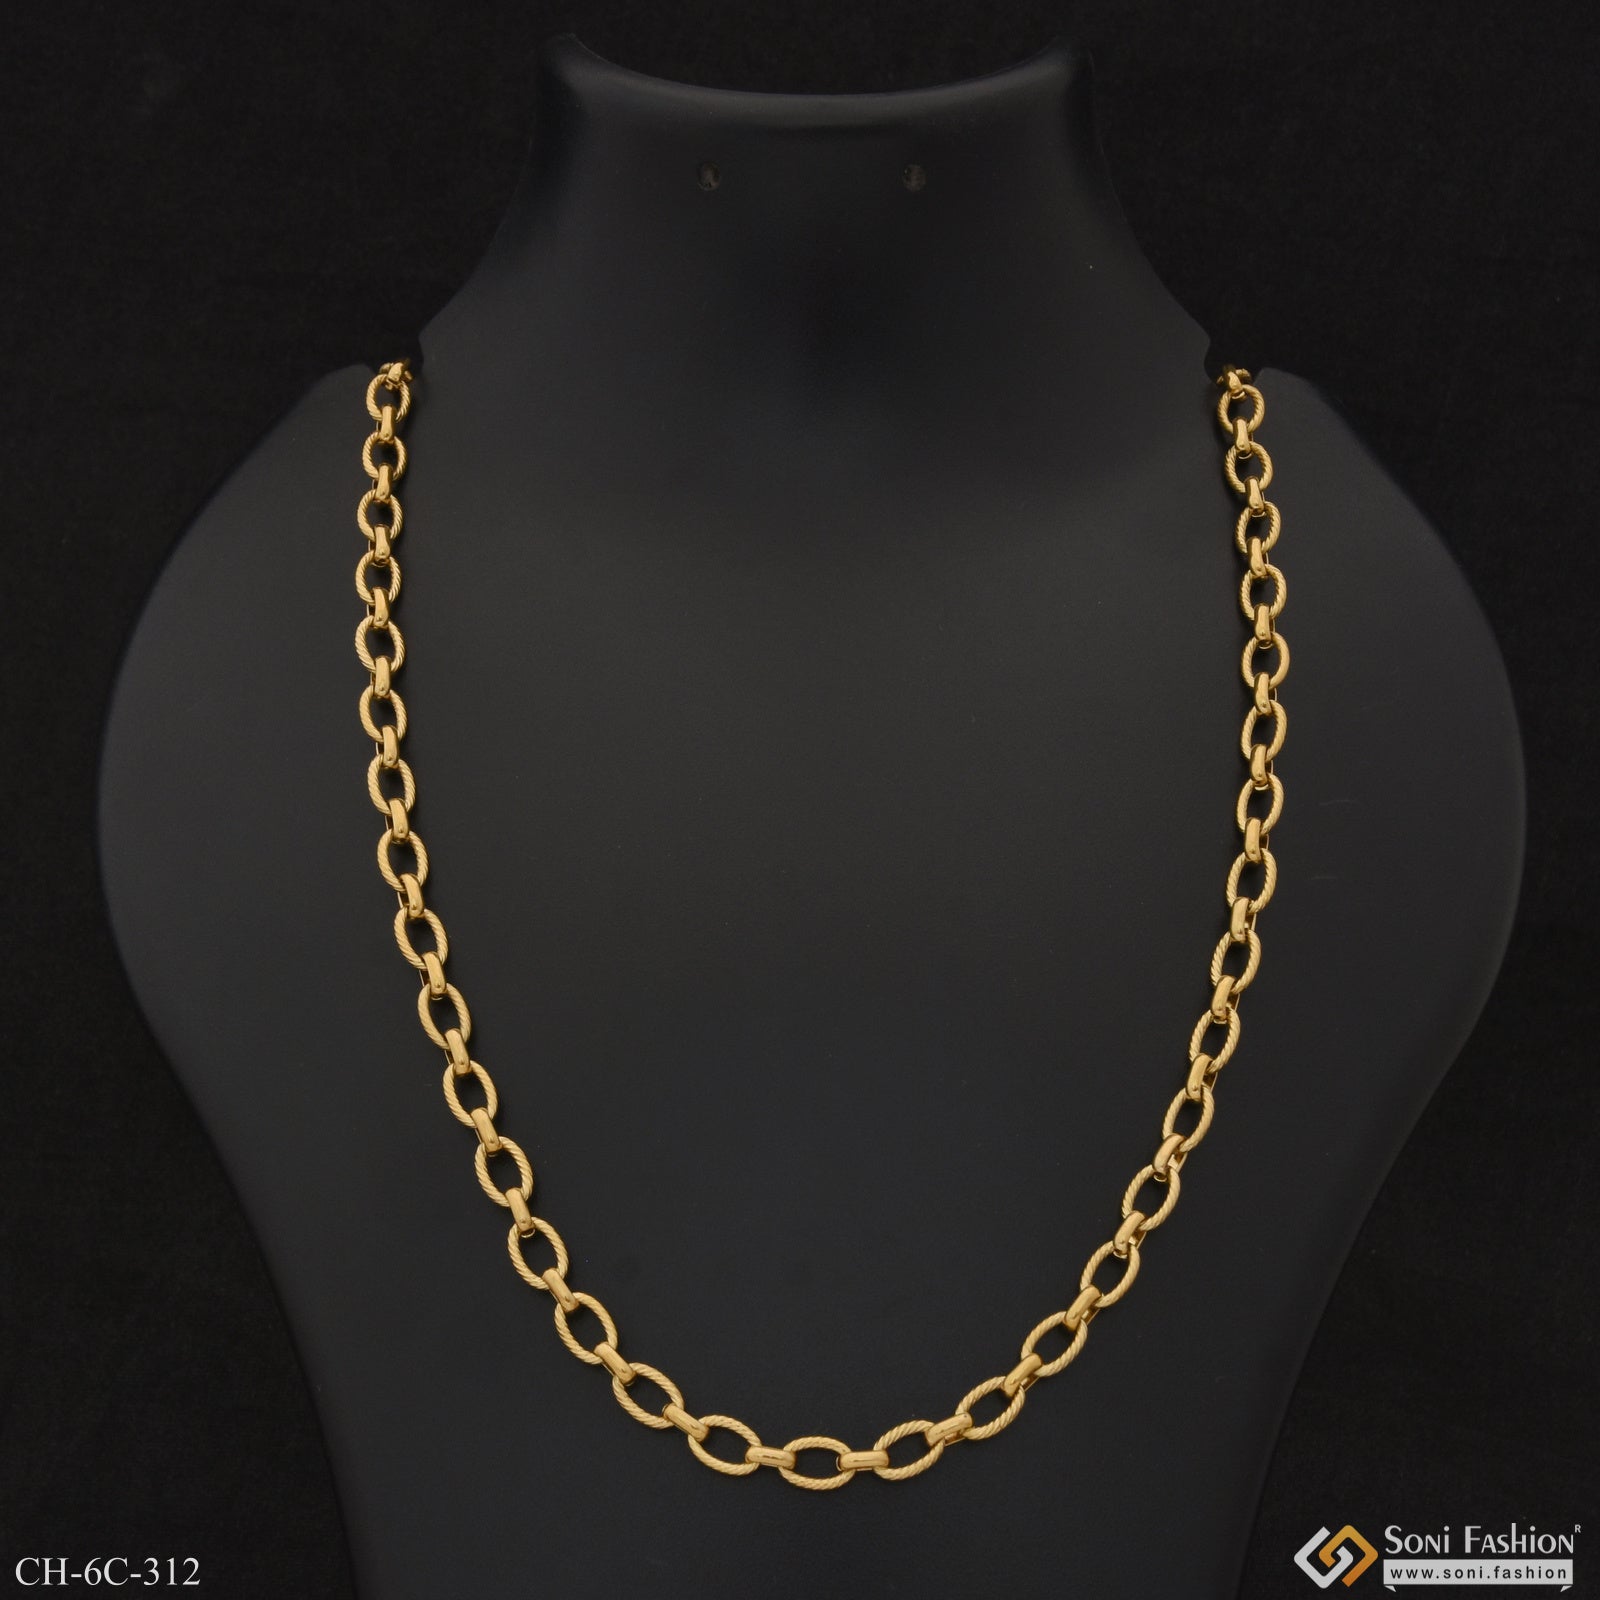 Cool Design Superior Quality Dainty Design Best Quality Chain for Men - Style C312